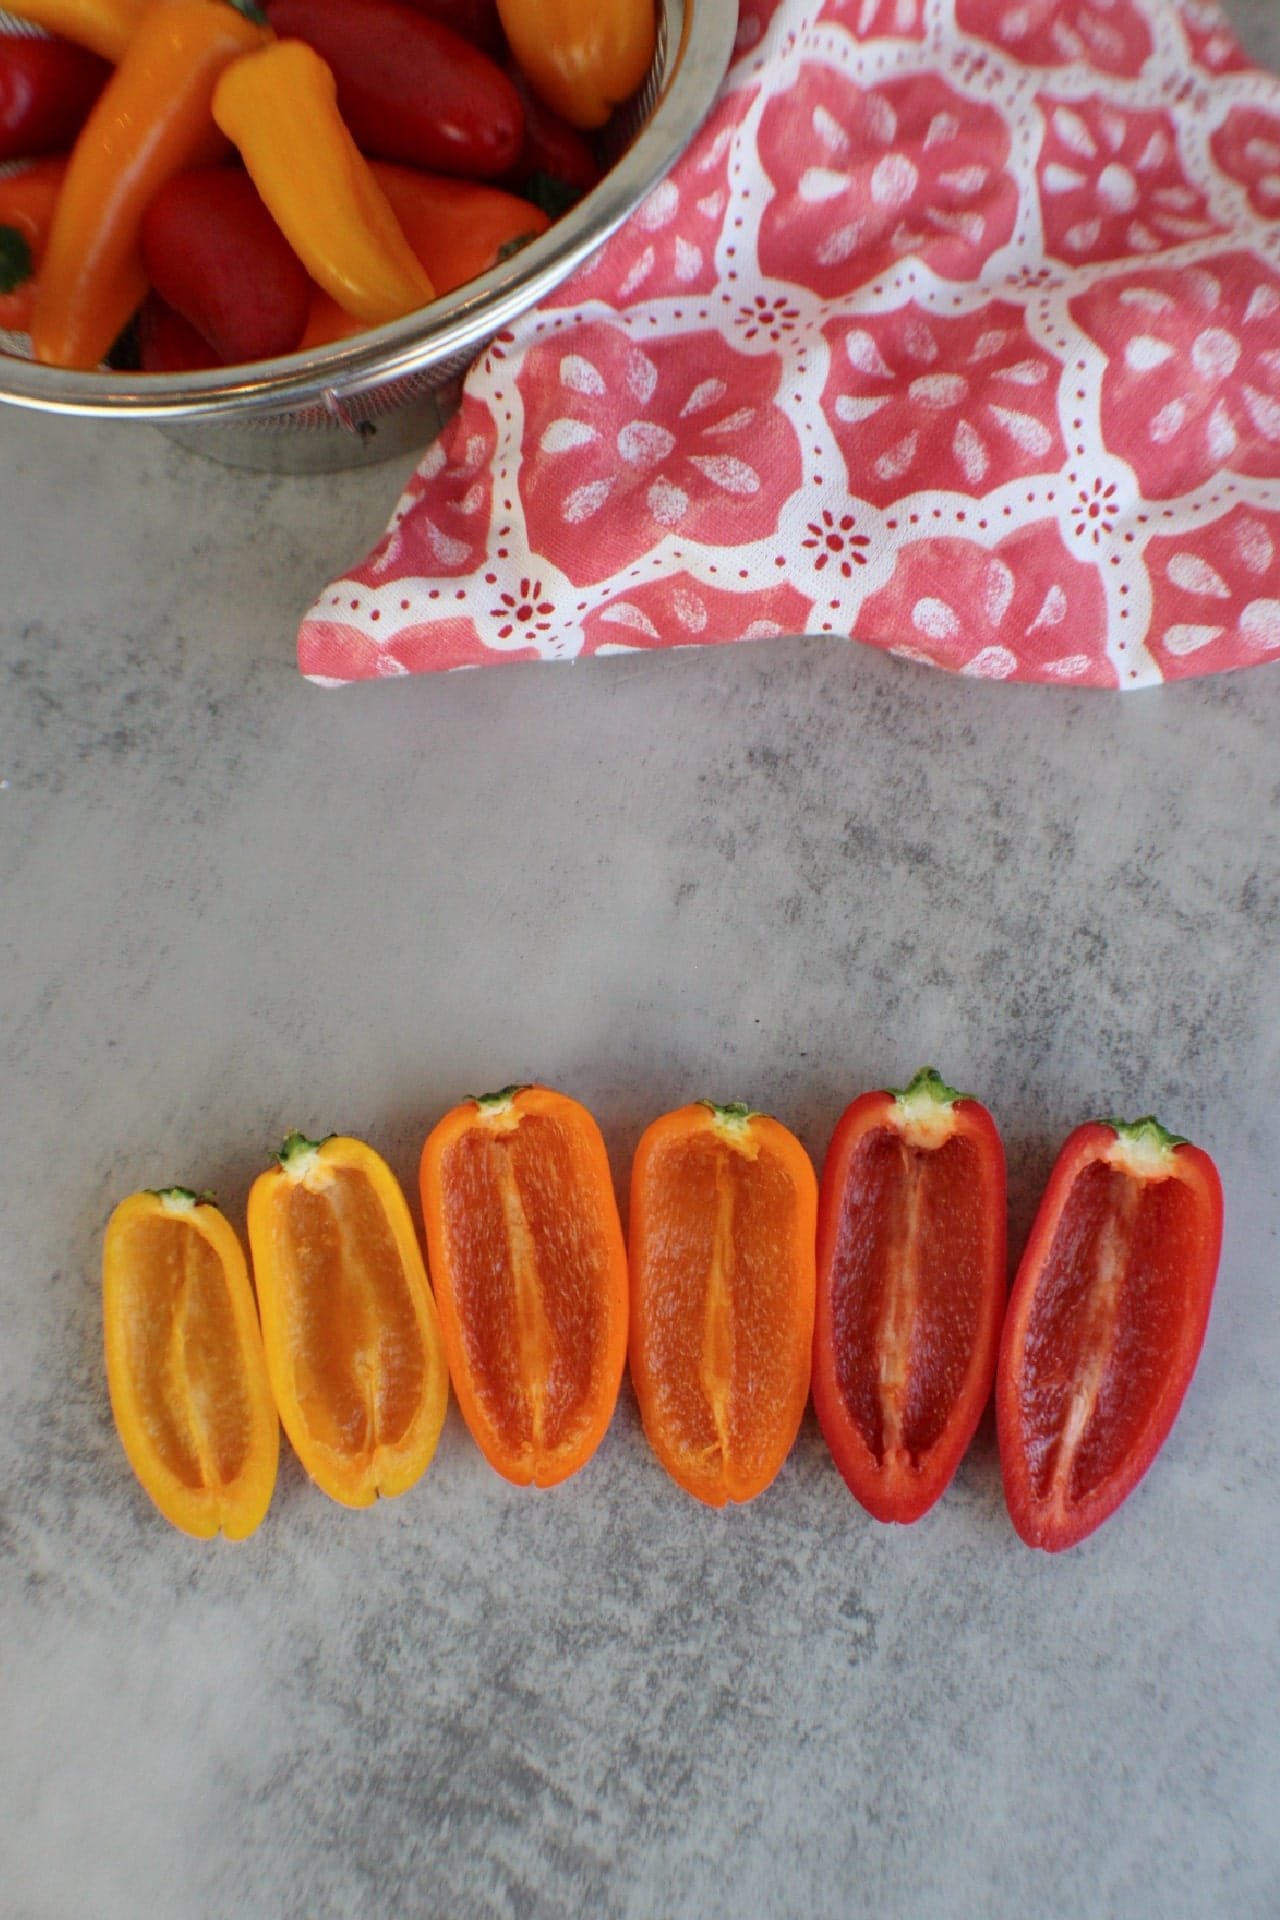 mini peppers sliced in half lengthwise with seeds removed